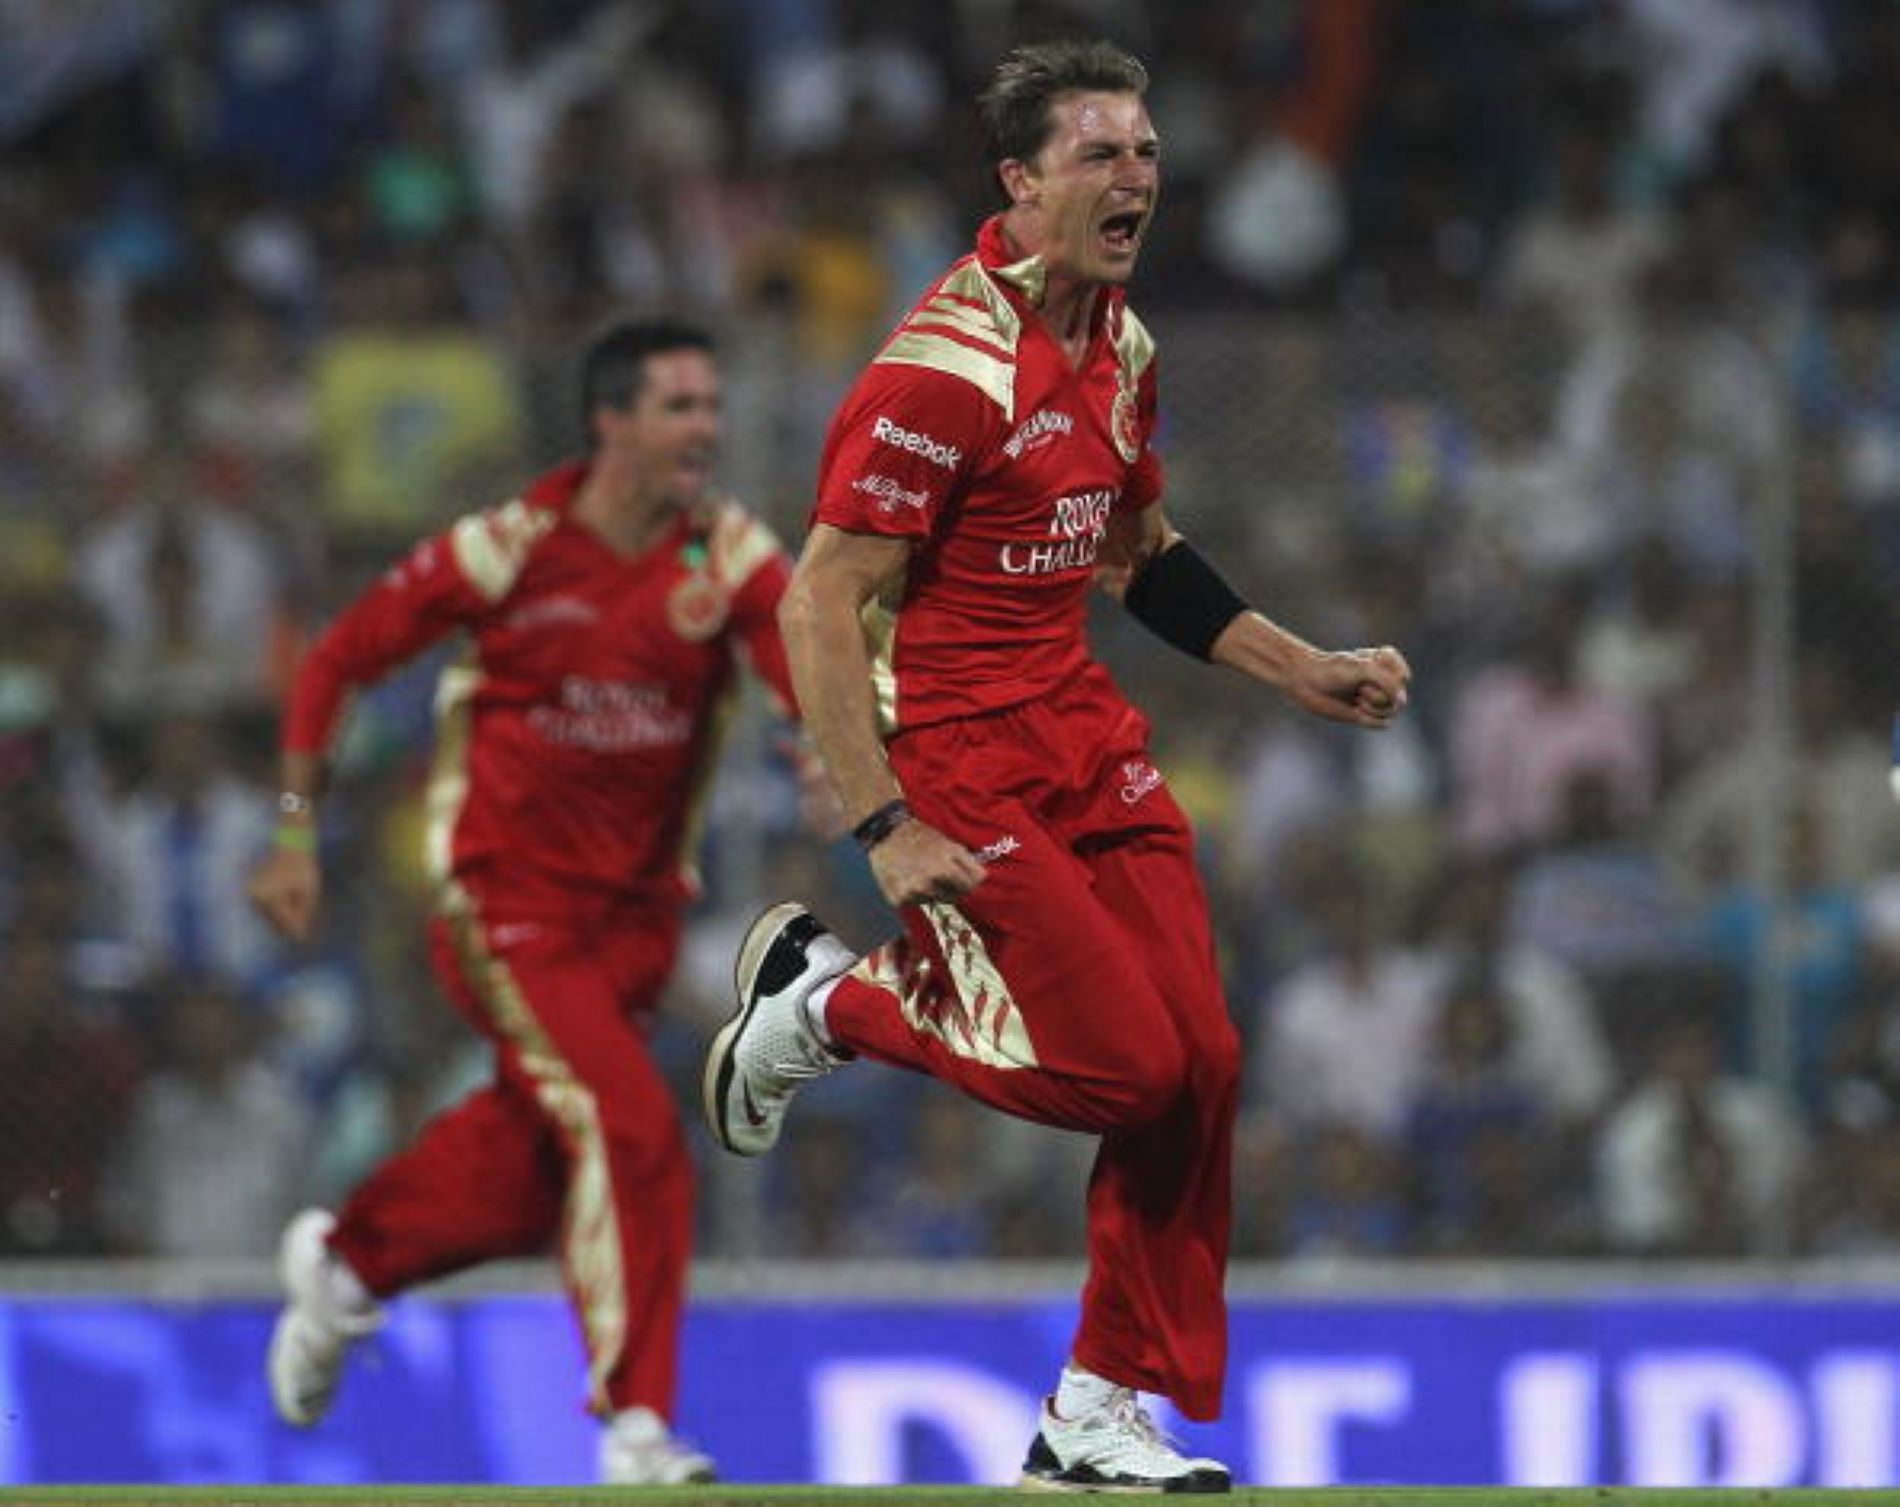 Dale Steyn at full throttle was a sight to behold in the IPL